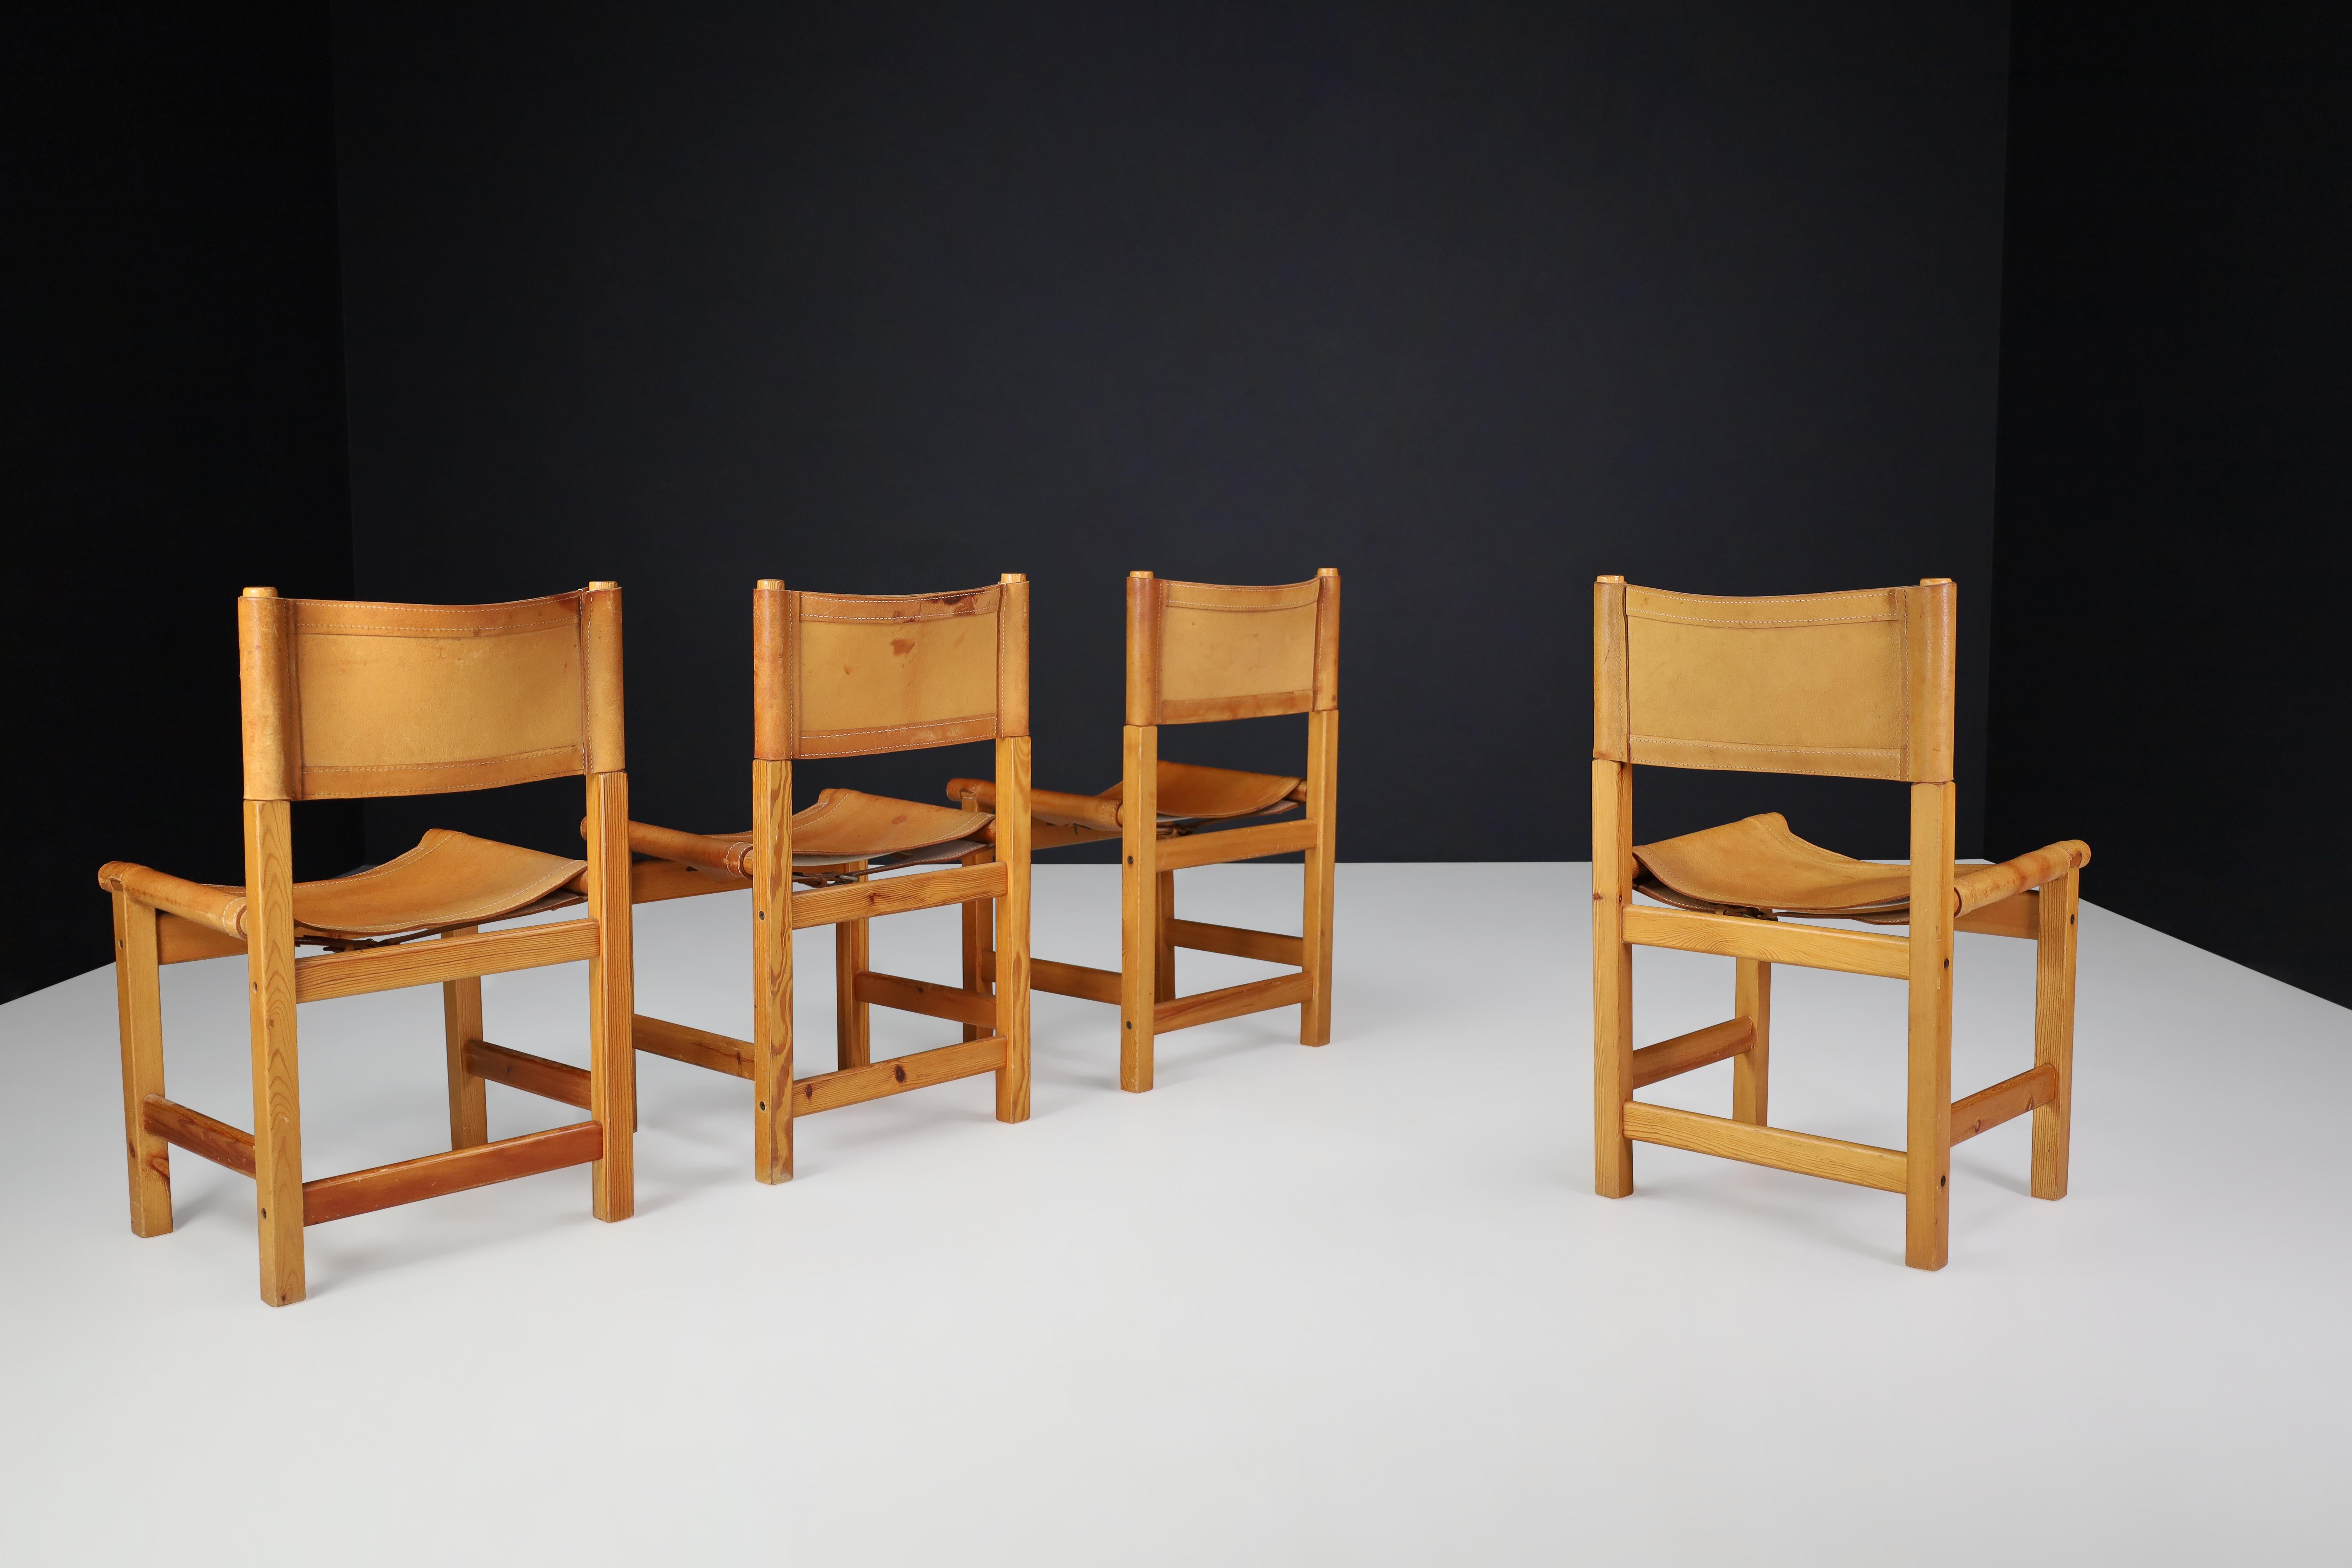 Scandinavian Modern Mid Century Dining Room Chairs Pine Wood Cognac Leather Sweden 1970s Set 4 For Sale